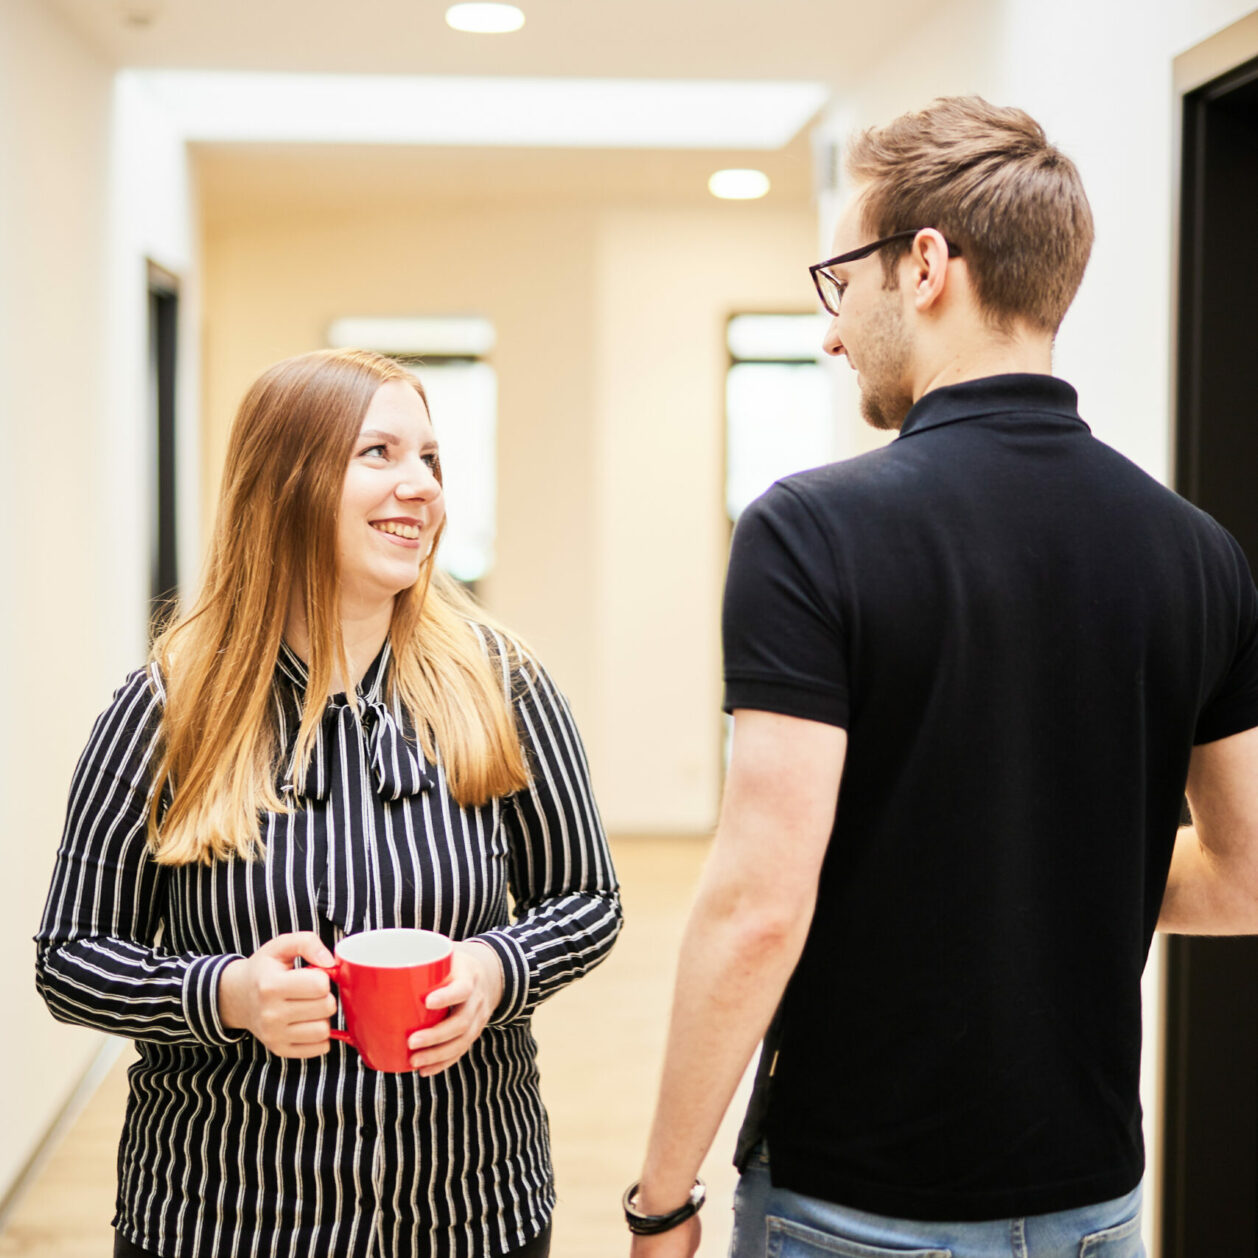 Photo of a woman and a man talking in the office hallway about the upcoming customer experience workshop.